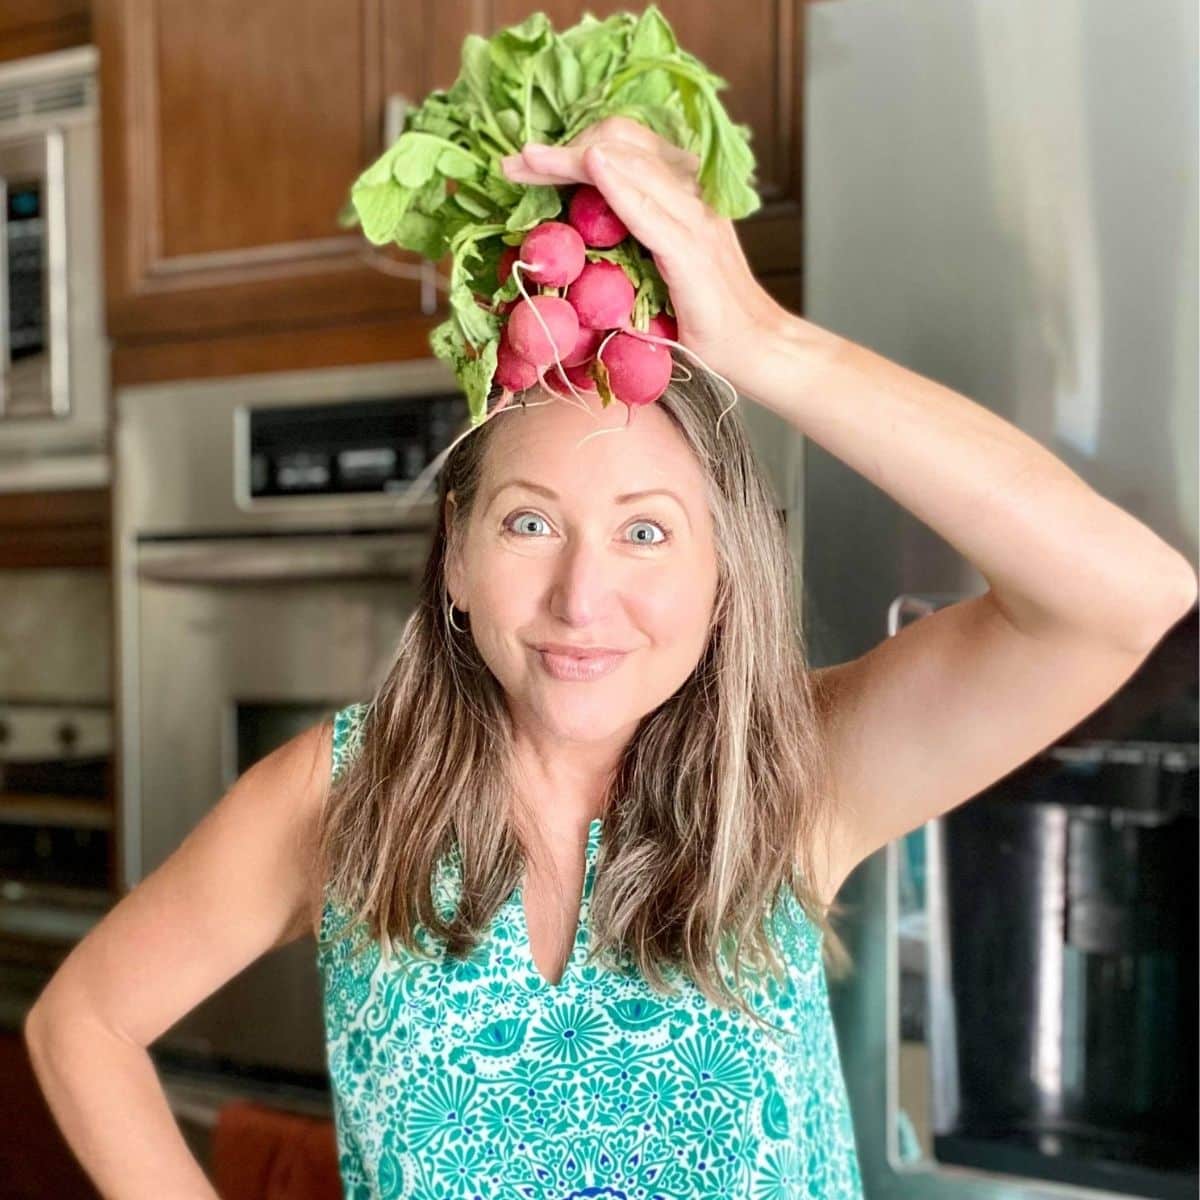 Amy in her kitchen holding a bunch of radishes on her head.